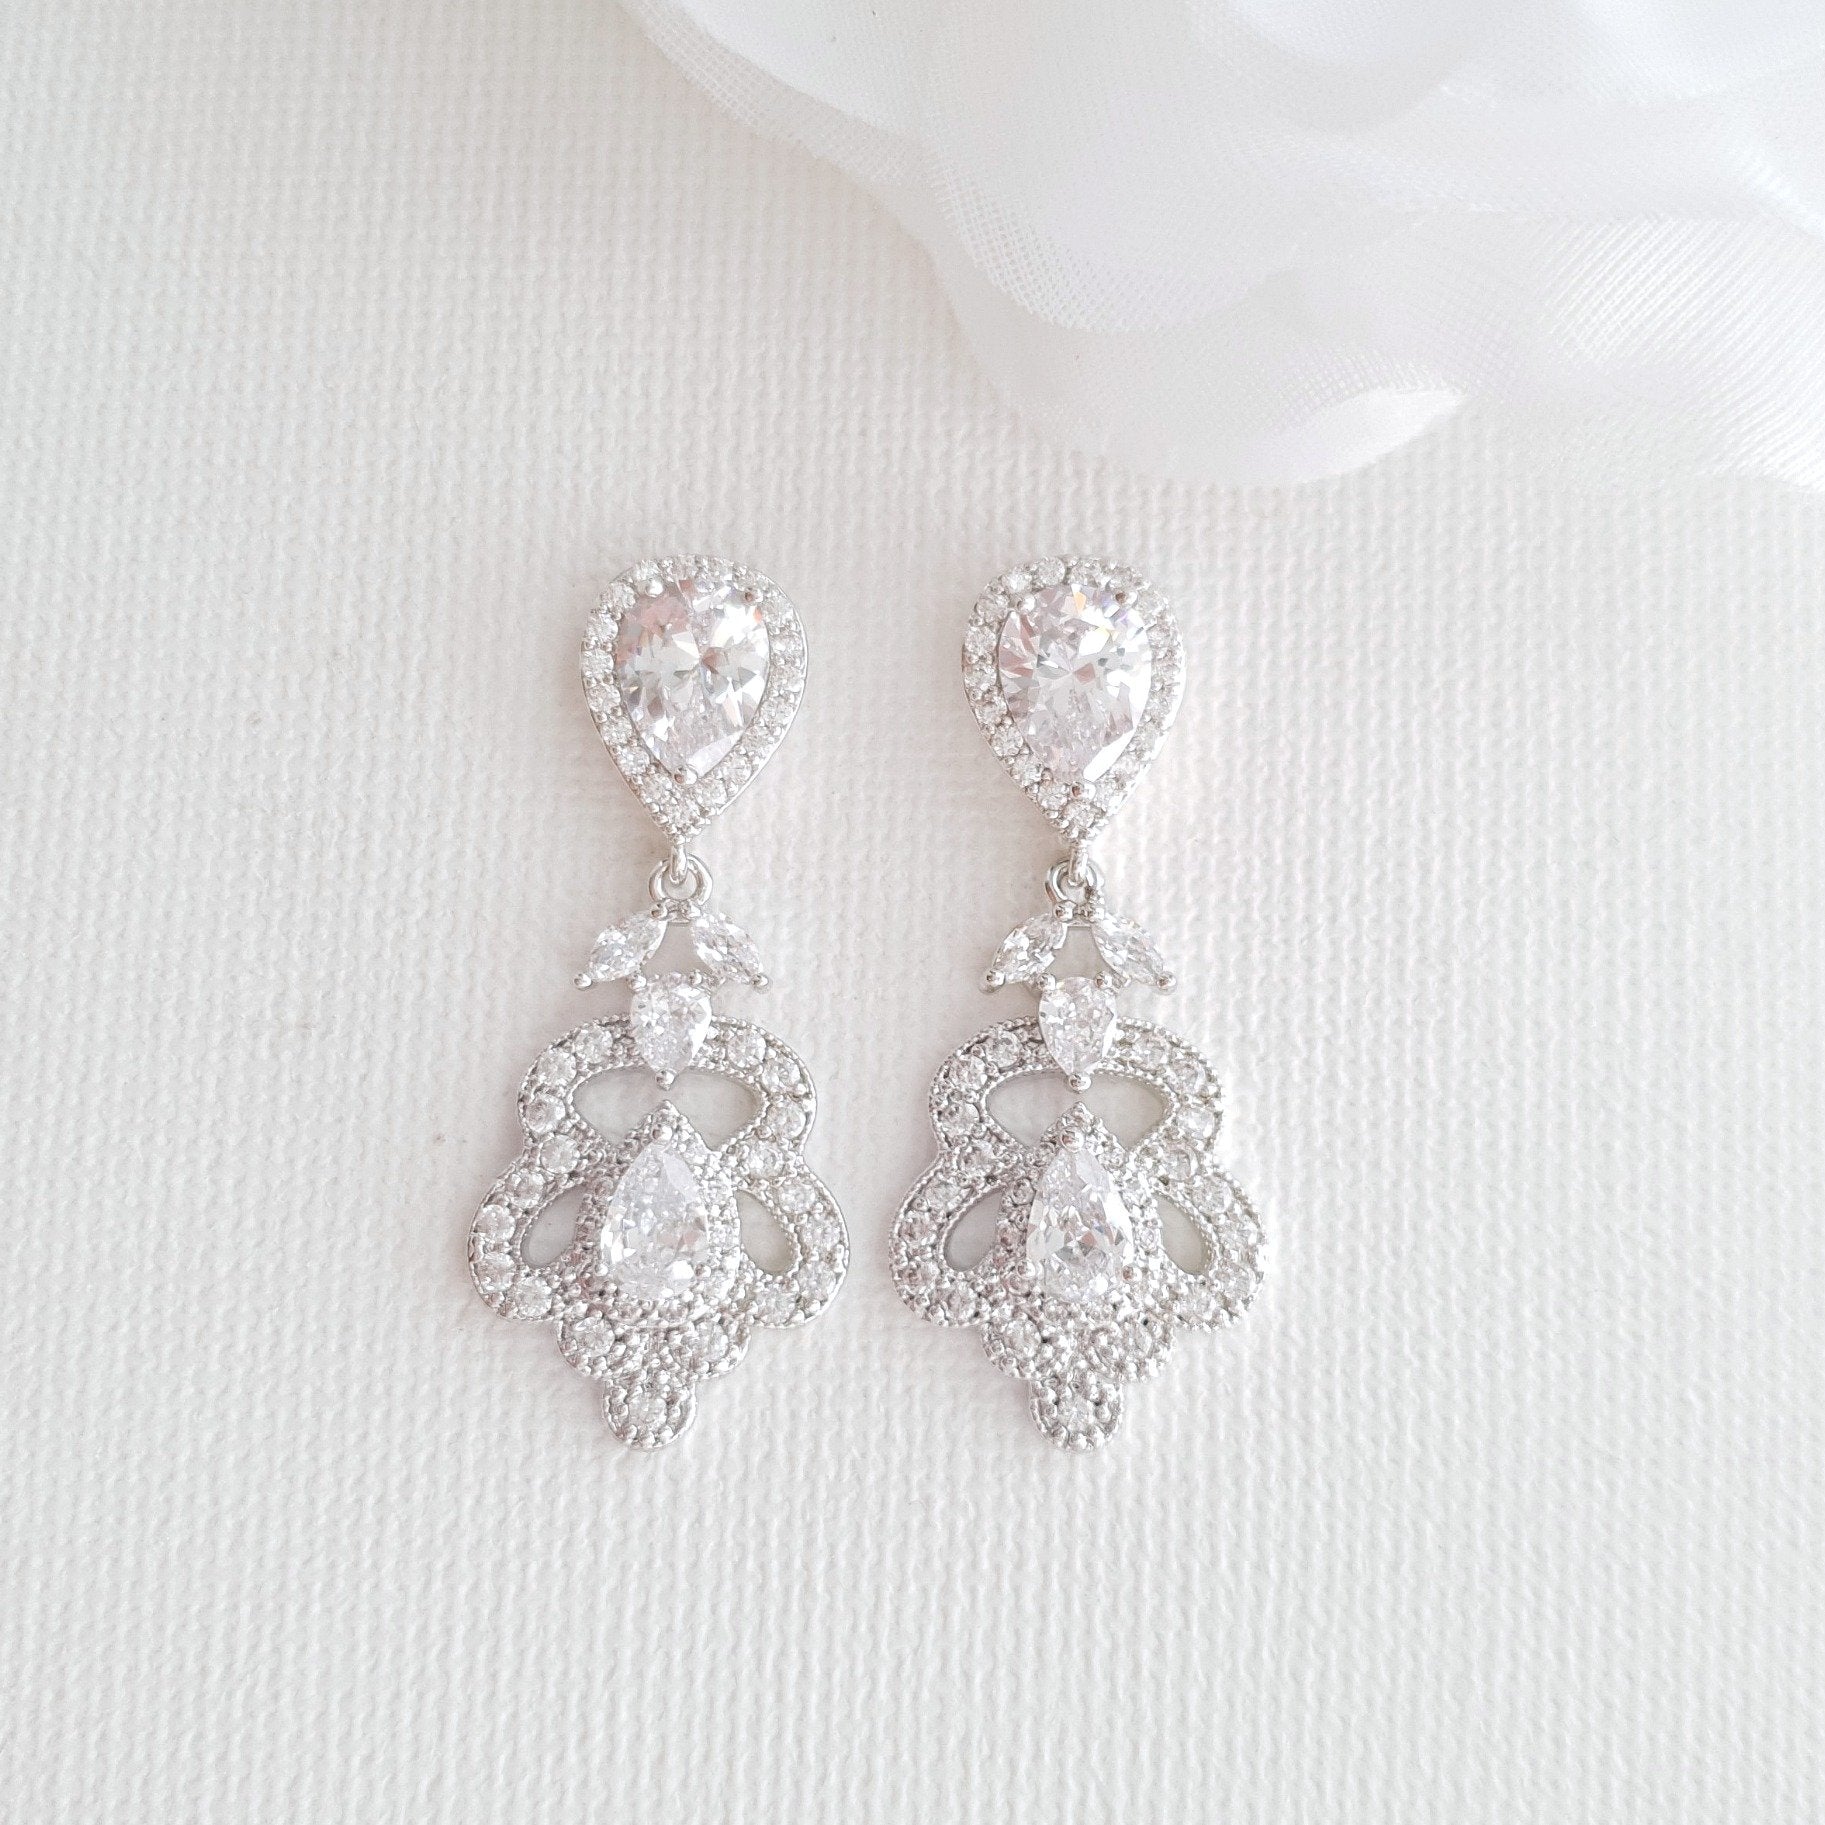 Vintage Bridal Earrings| Silver Vintage Jewelry for Brides Bridesmaids ...